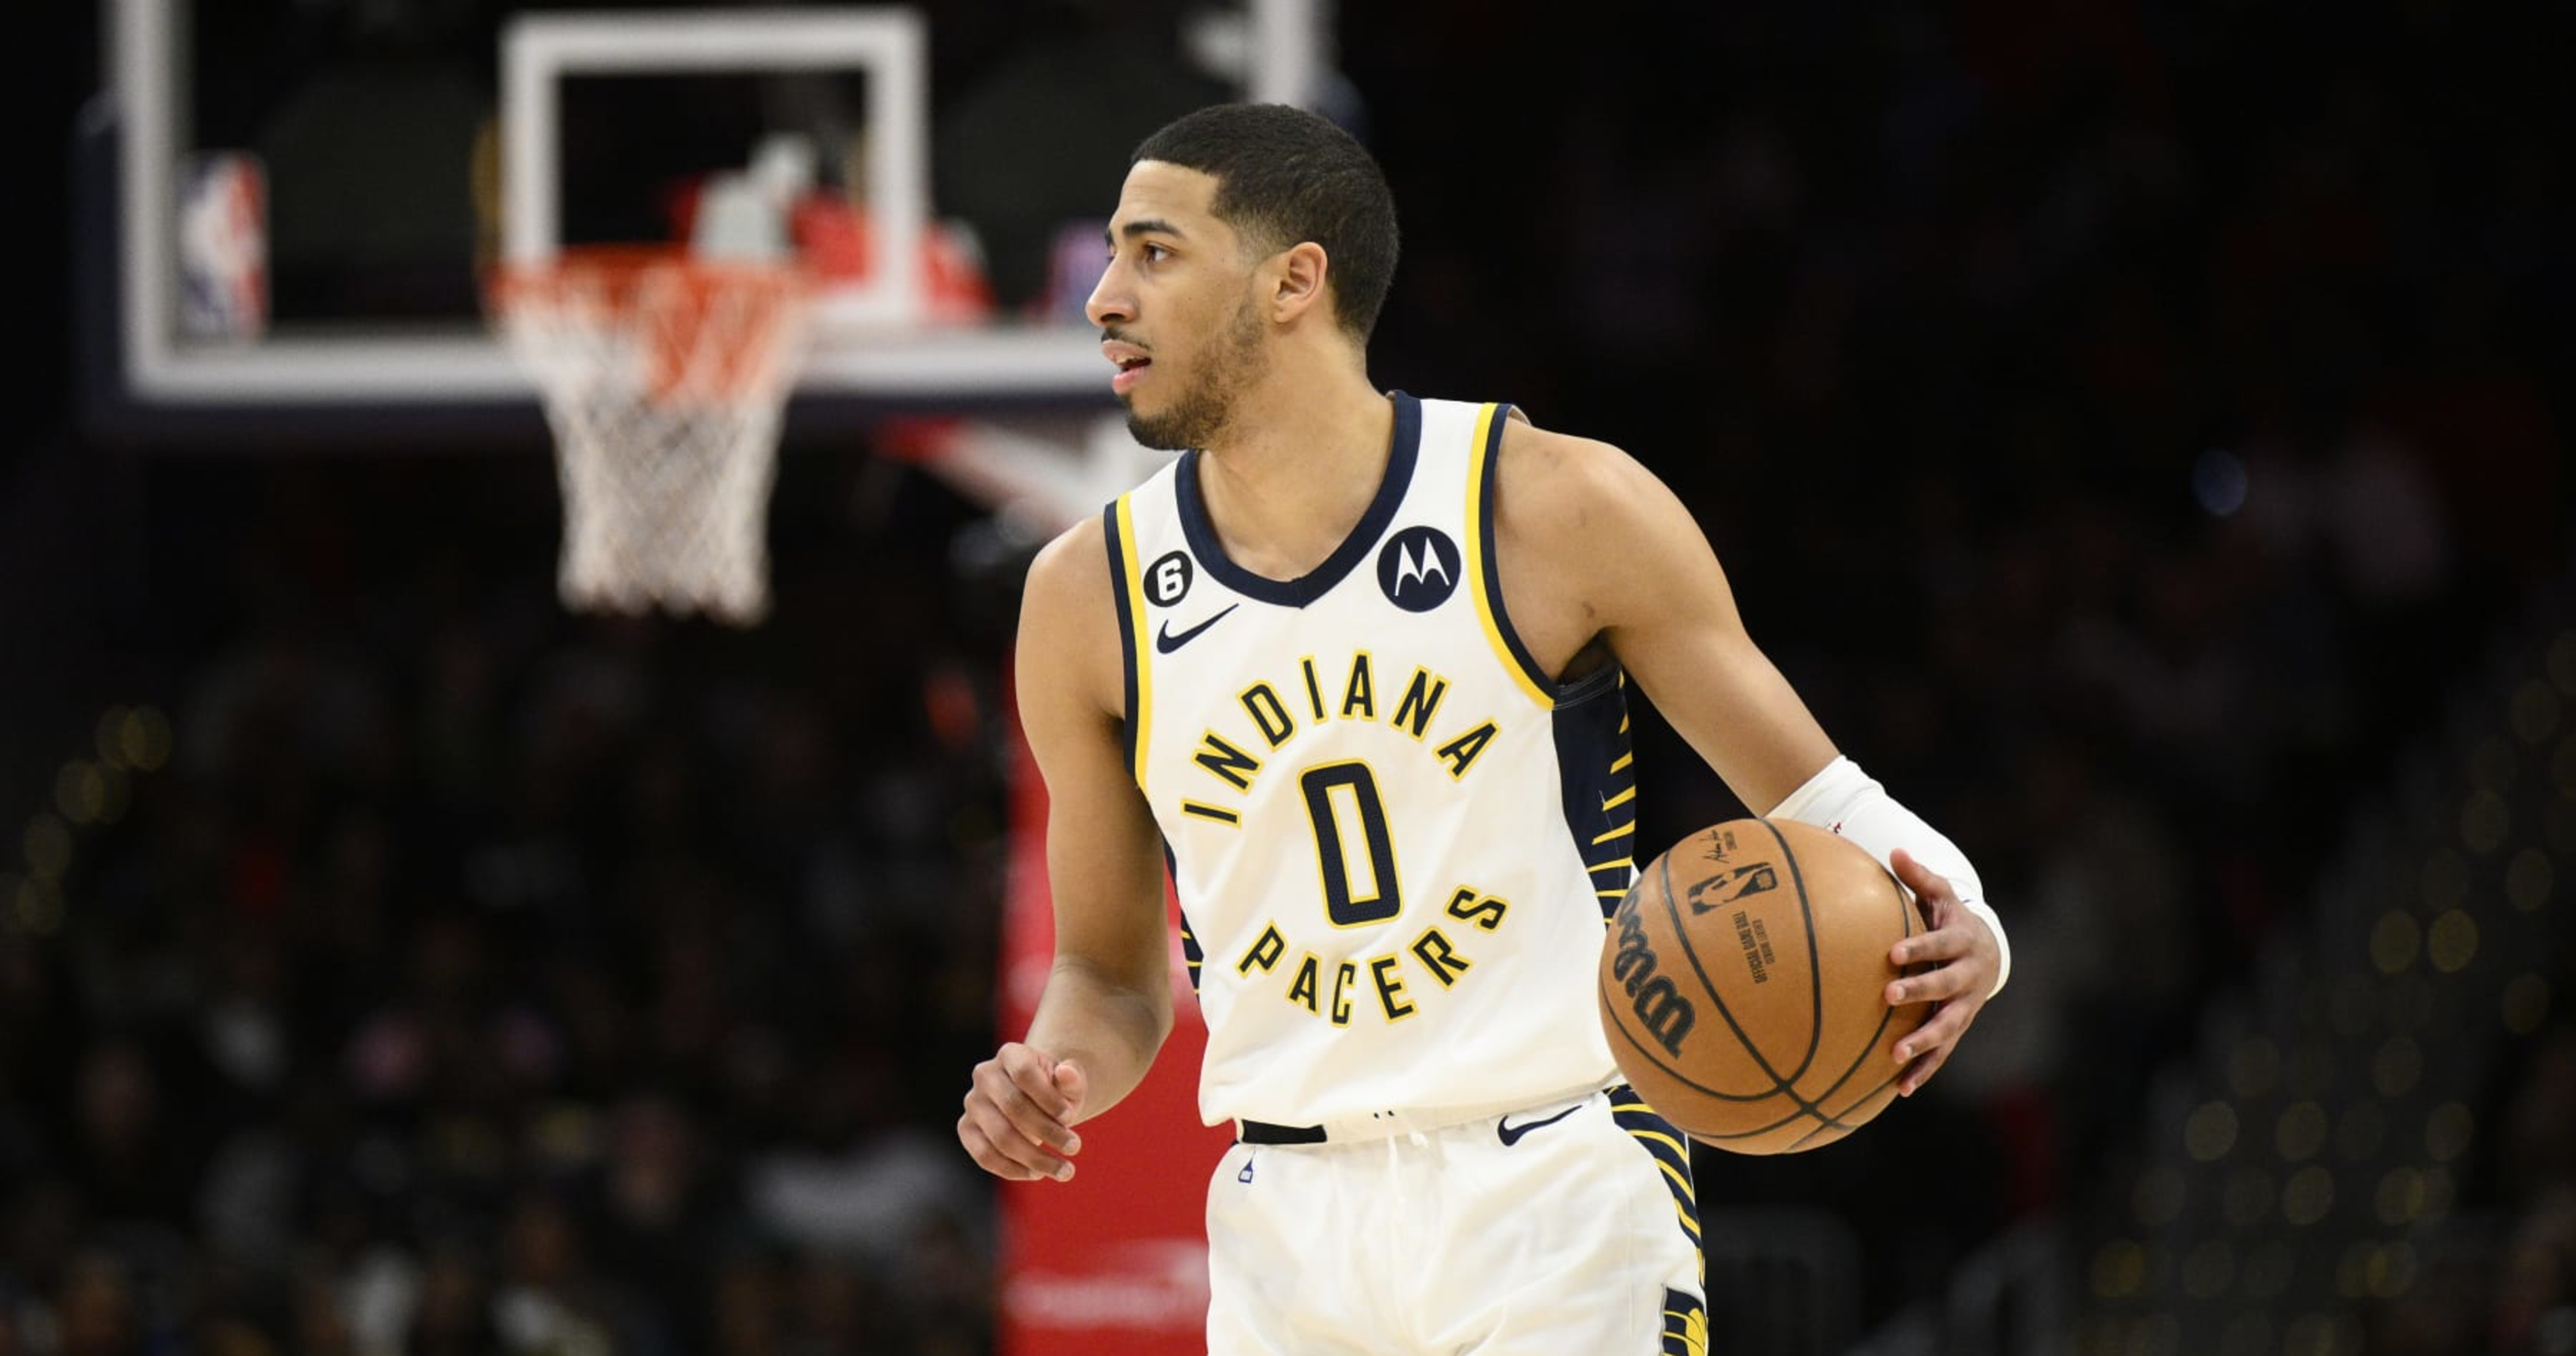 Indiana Pacers Announce 2023-24 Regular Season Schedule